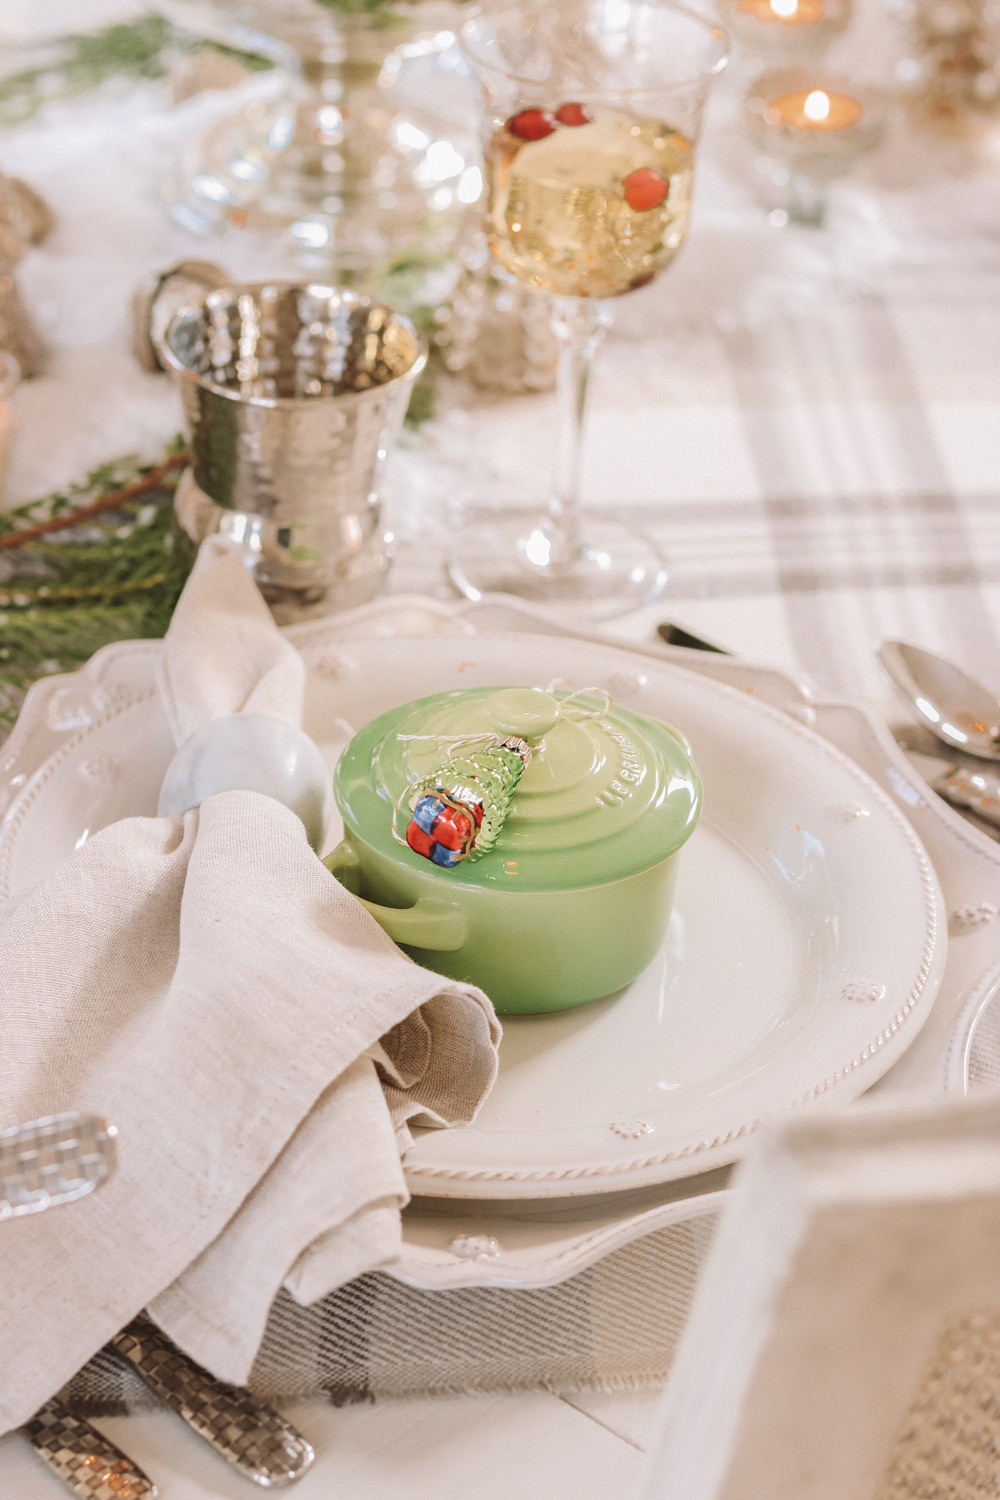 Dinner Party Gifts Ideas
 Christmas Dinner Party and Cookware Gift Ideas